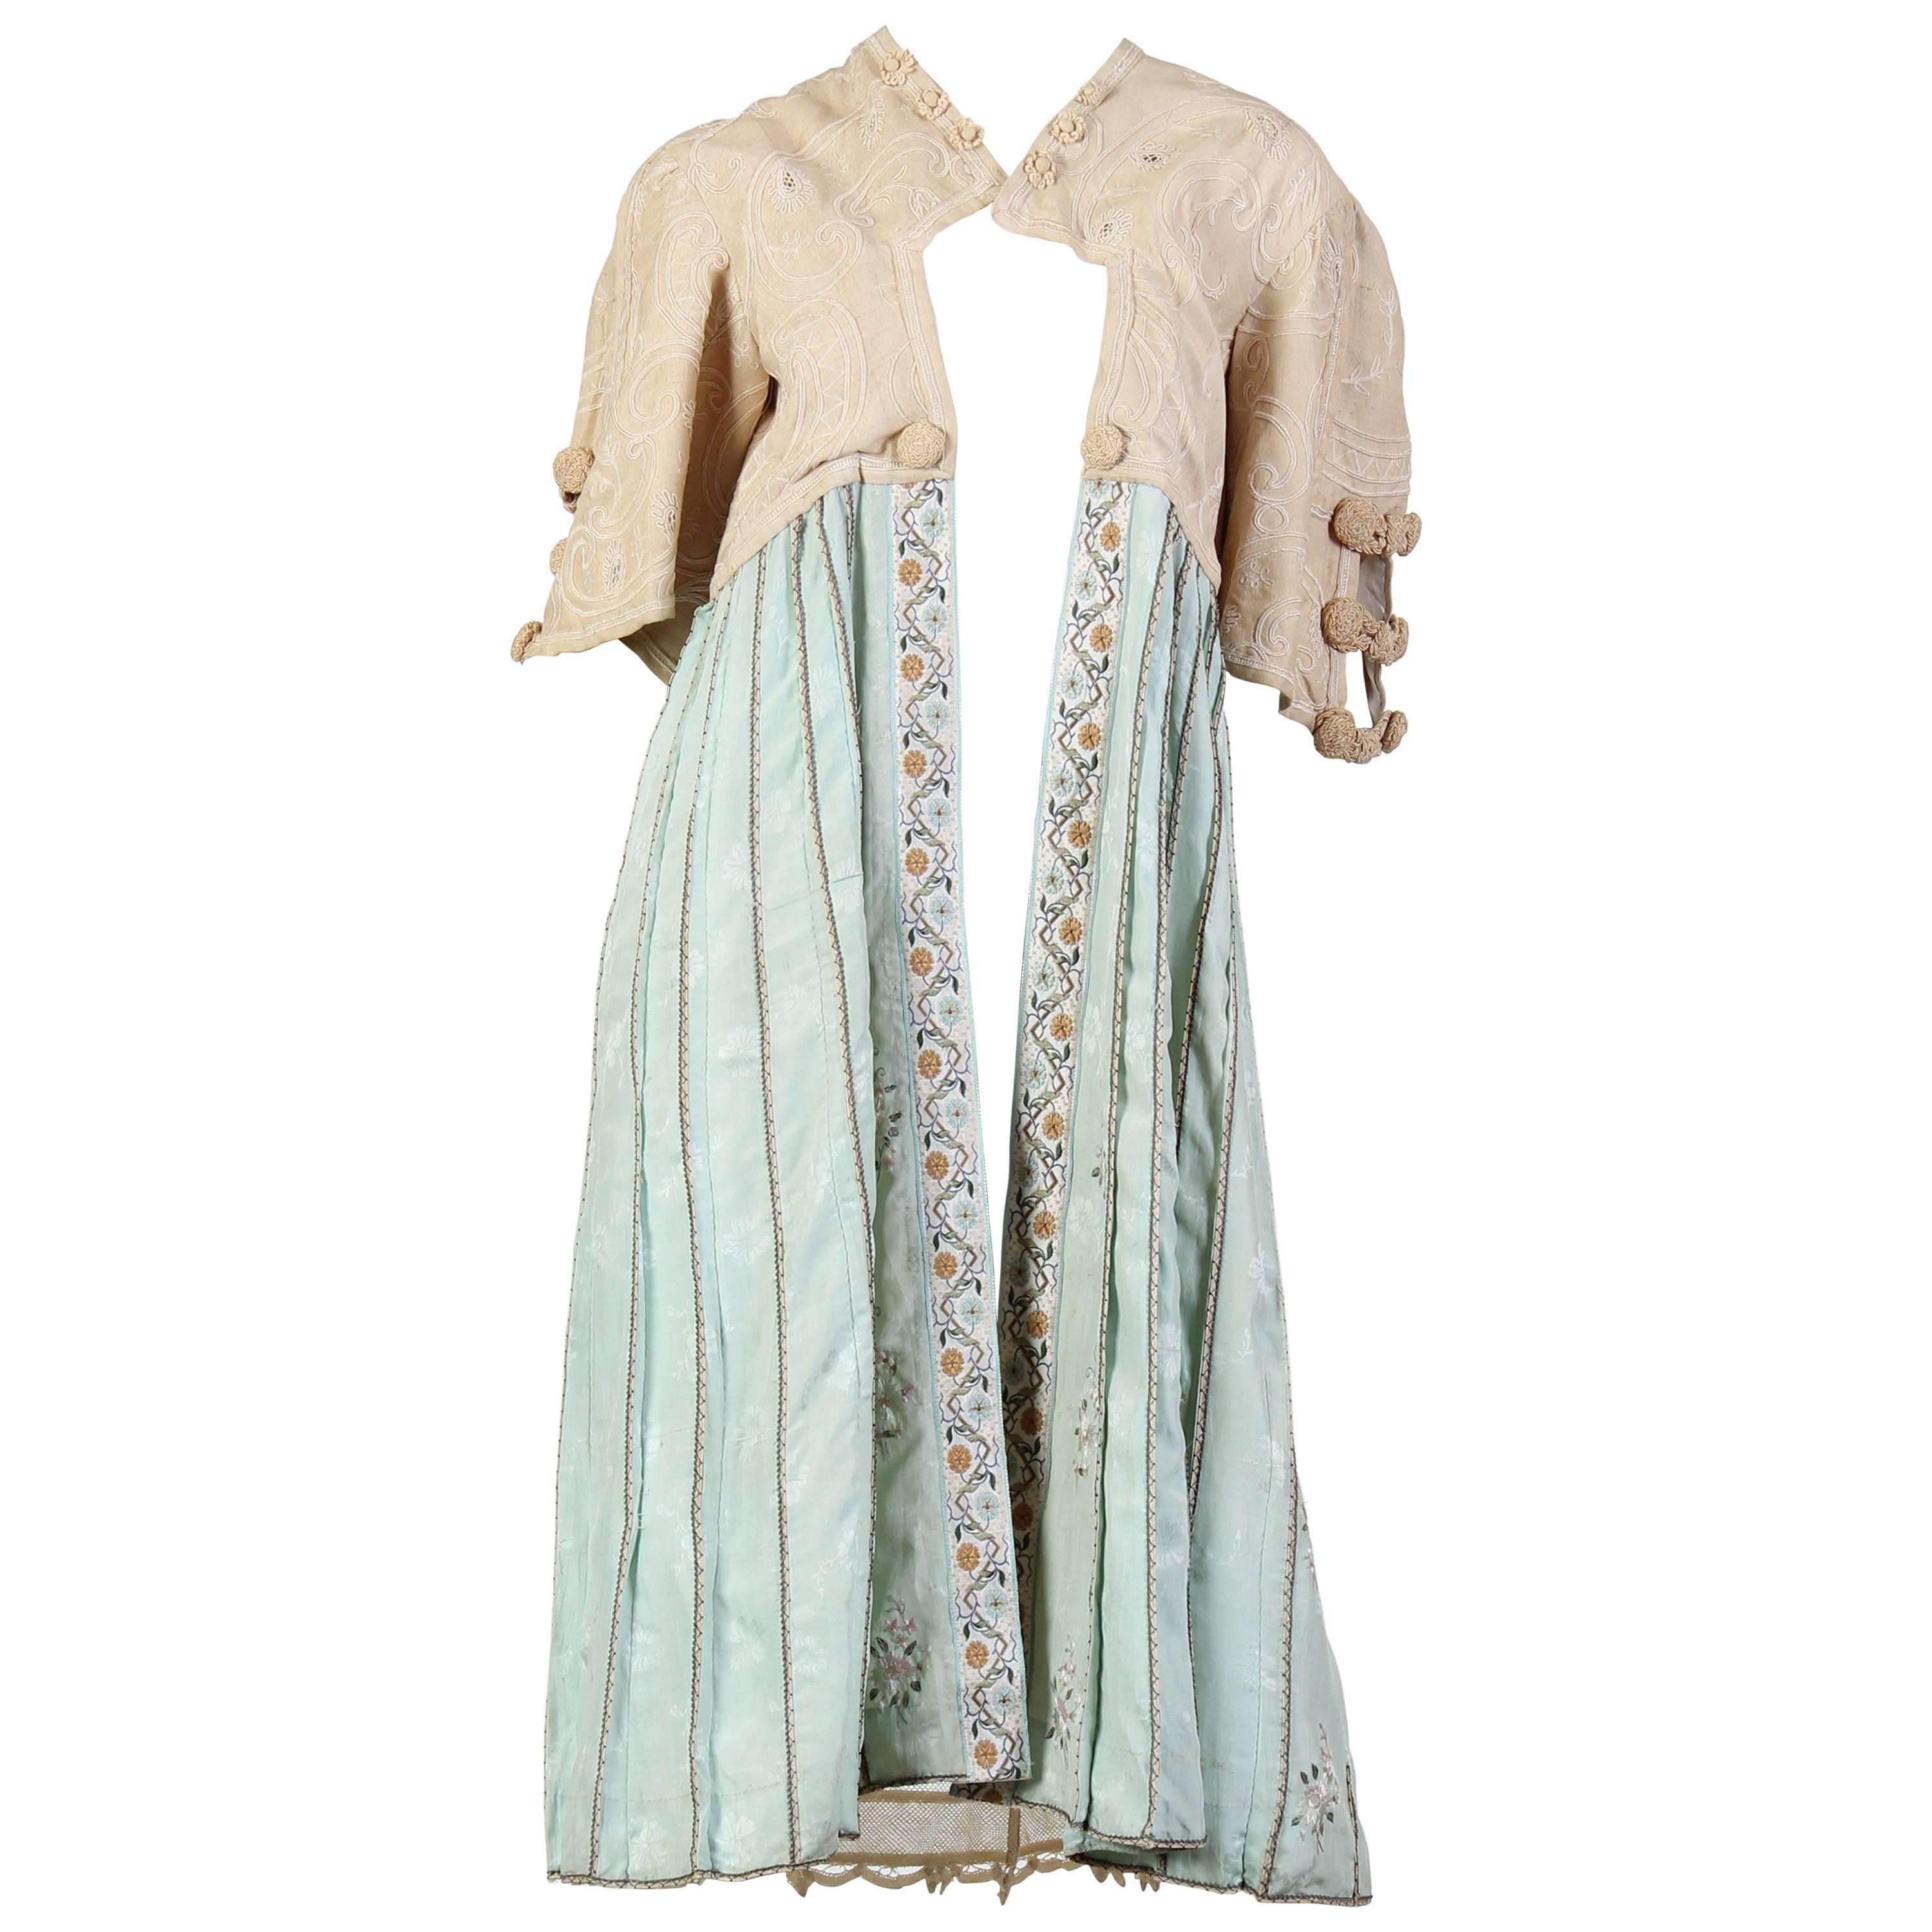 Edwardian Embroidered Jacket with Antique Chinese Embroidery